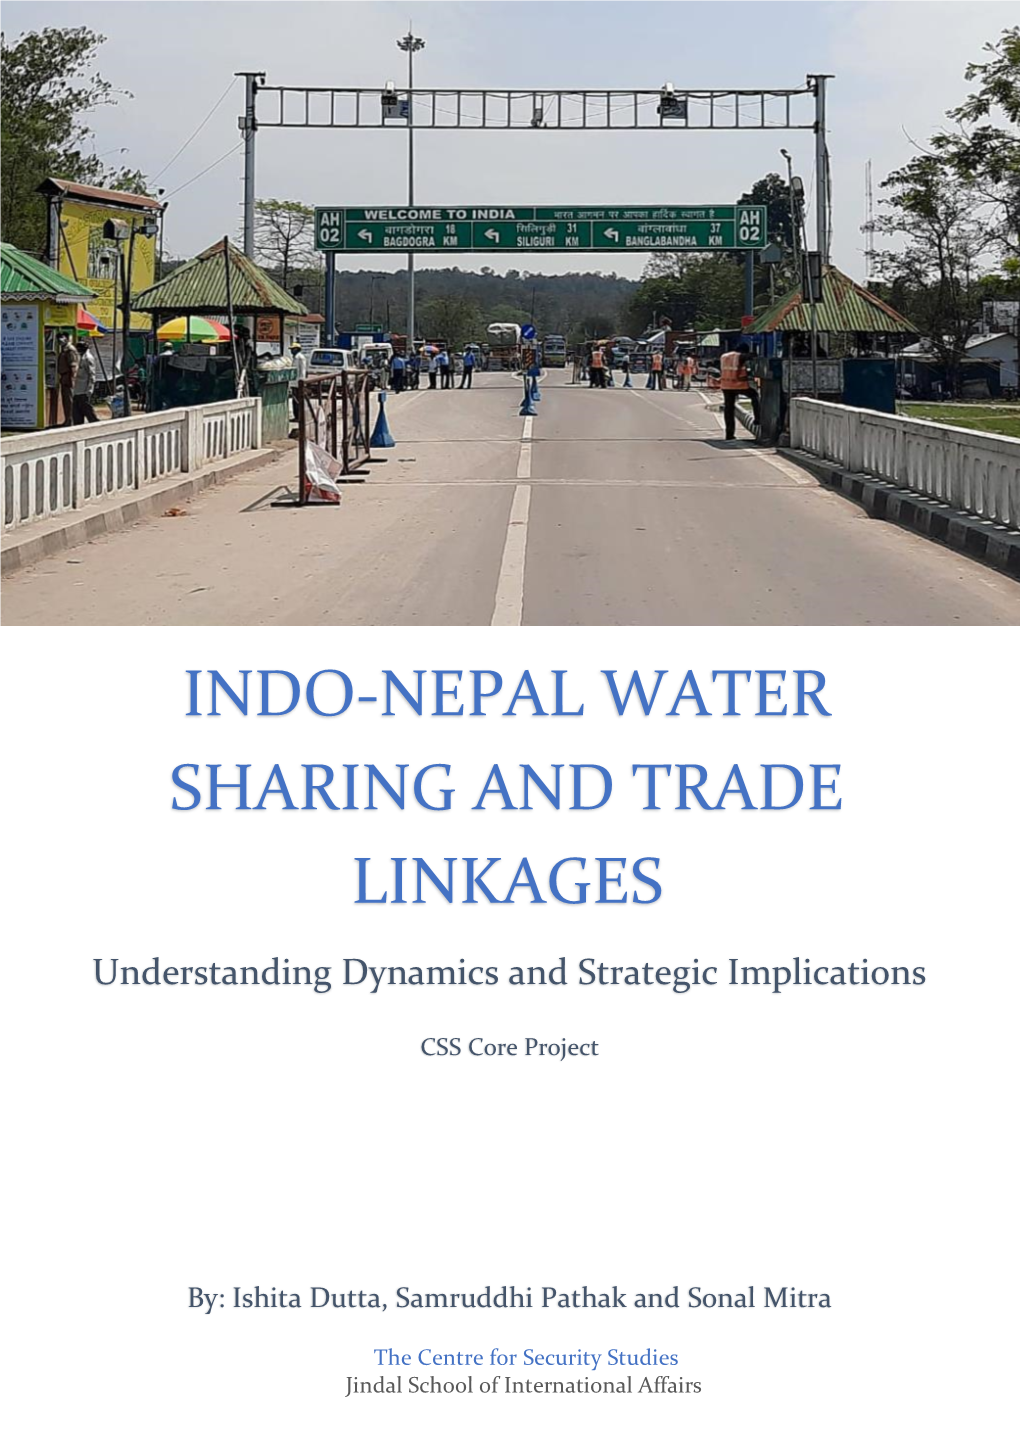 Indo-Nepal Water Sharing and Trade Linkages